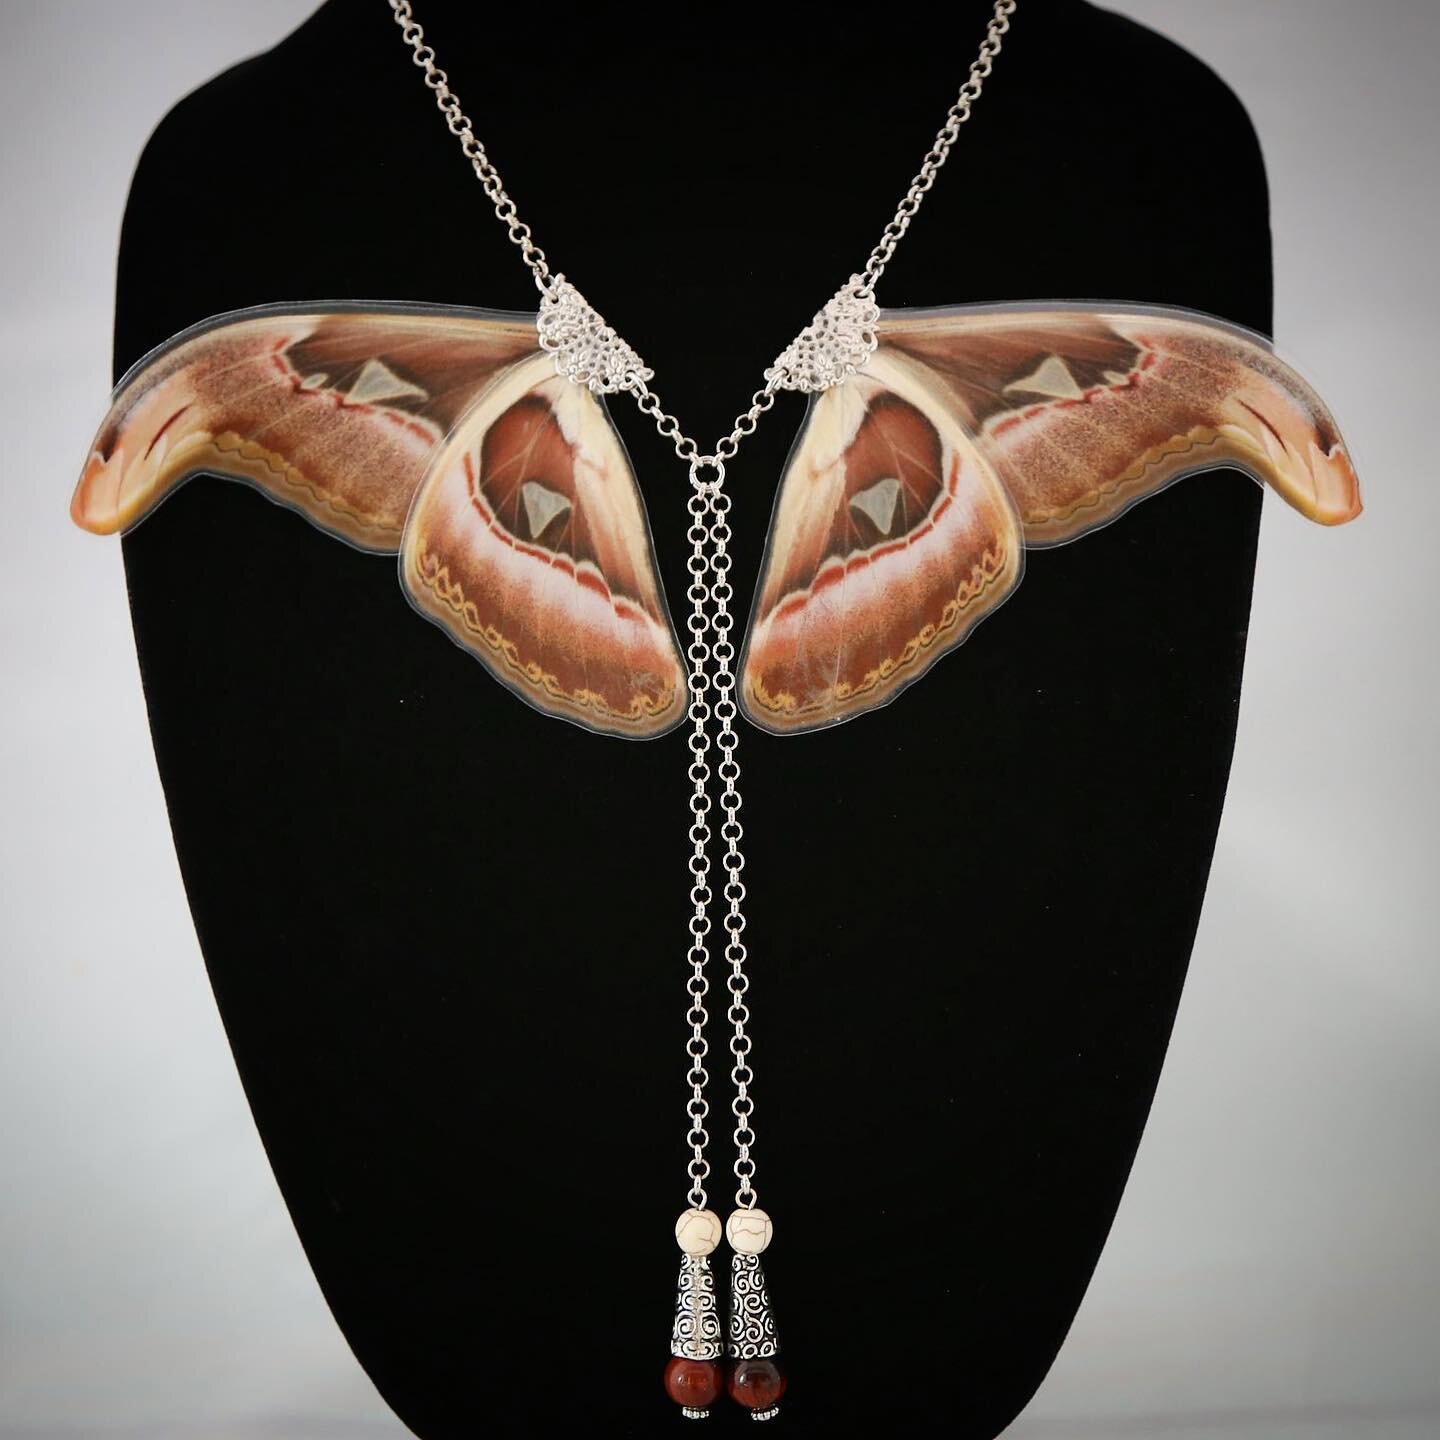 This big boi is available 🙌🏽Swipe to find me in person this month before summer hiatus begins in June!
&ldquo;Atlas moths are named after Atlas, the Titan of Greek mythology (due to their size). In Hong Kong, the Cantonese means &quot;snake's head 